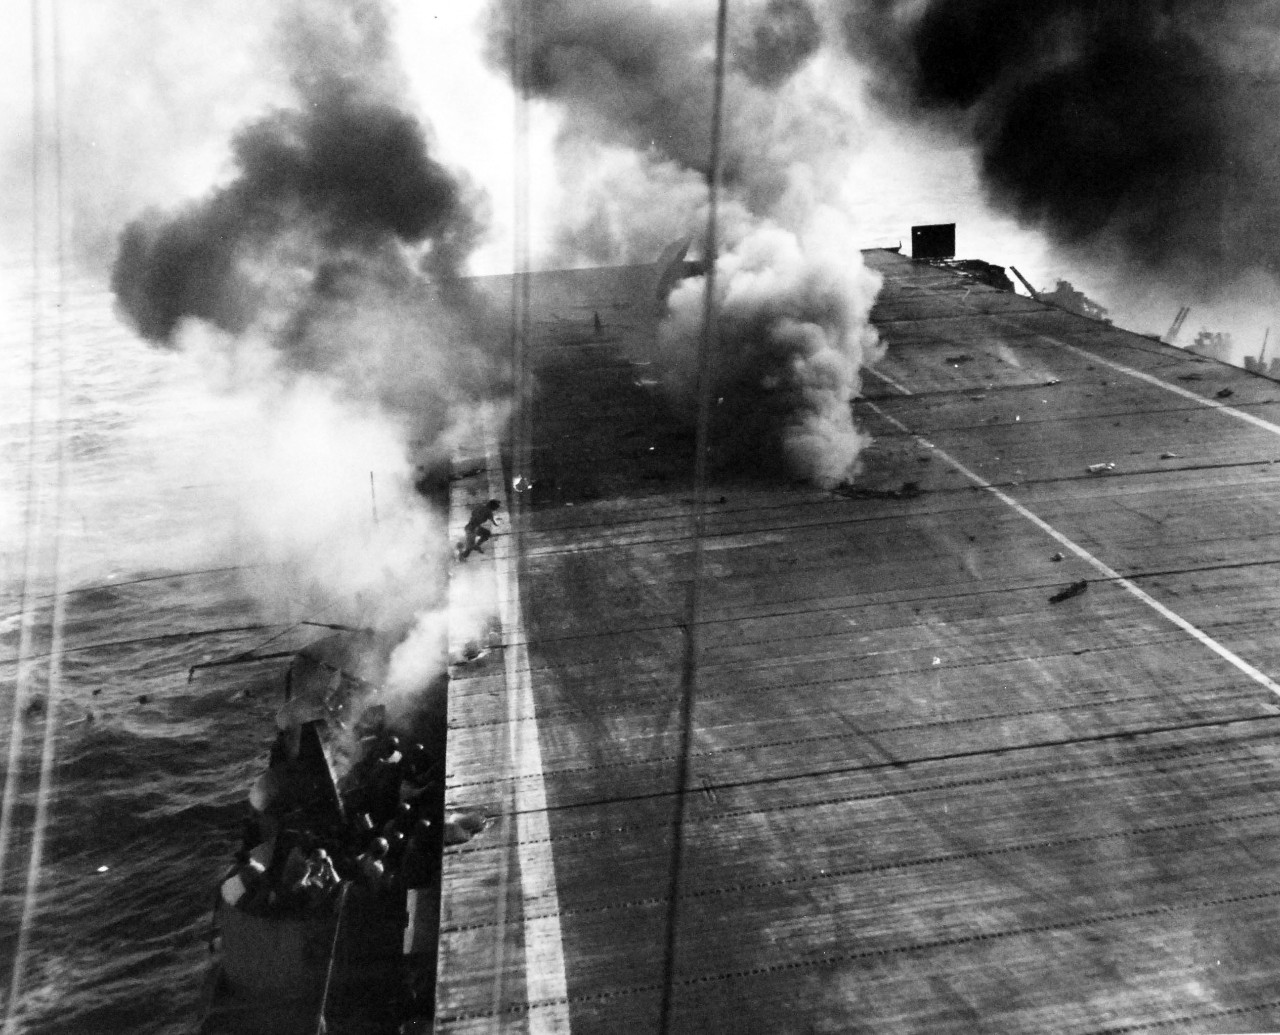 80-G-270662:   Battle off Samar, Japanese Kamikaze, October 25, 1944.   Japanese “Zero” crashes deck of USS Suwannee (CVE-27) and bursts into flames, Leyte Gulf, Philippines, 25 October 1944.   TBM may be seen in flight behind smoke.  This plane which was loaded with a torpedo was unharmed by the crash.  Official U.S. Navy Photograph, now in the collections of the National Archives.   (2014/4/24). 